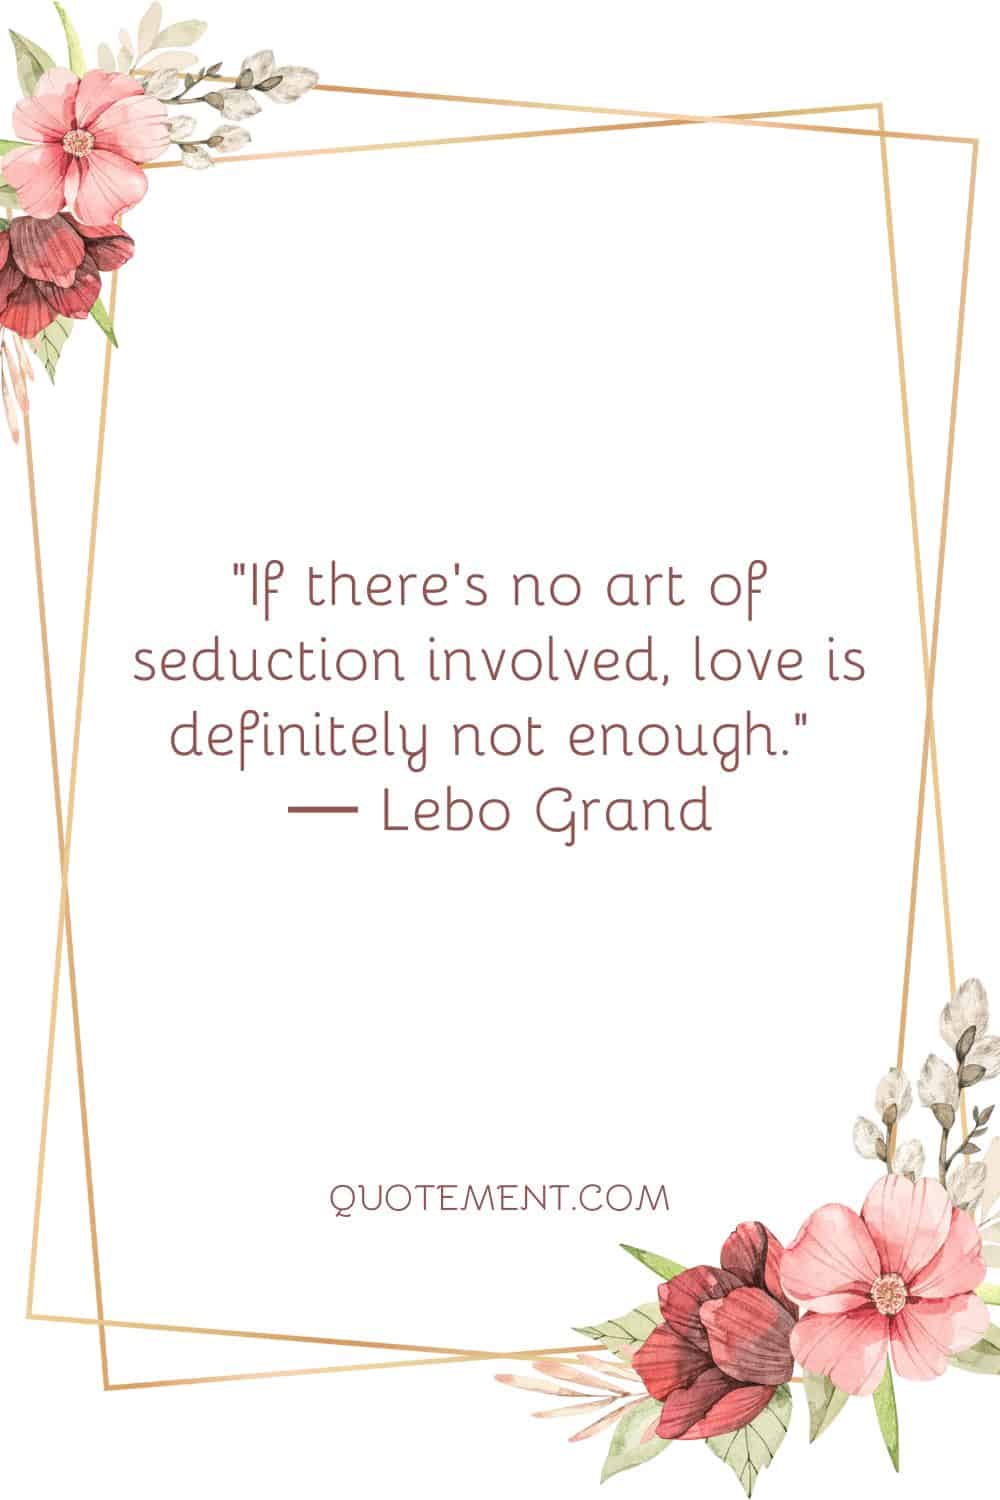 If there’s no art of seduction involved, love is definitely not enough